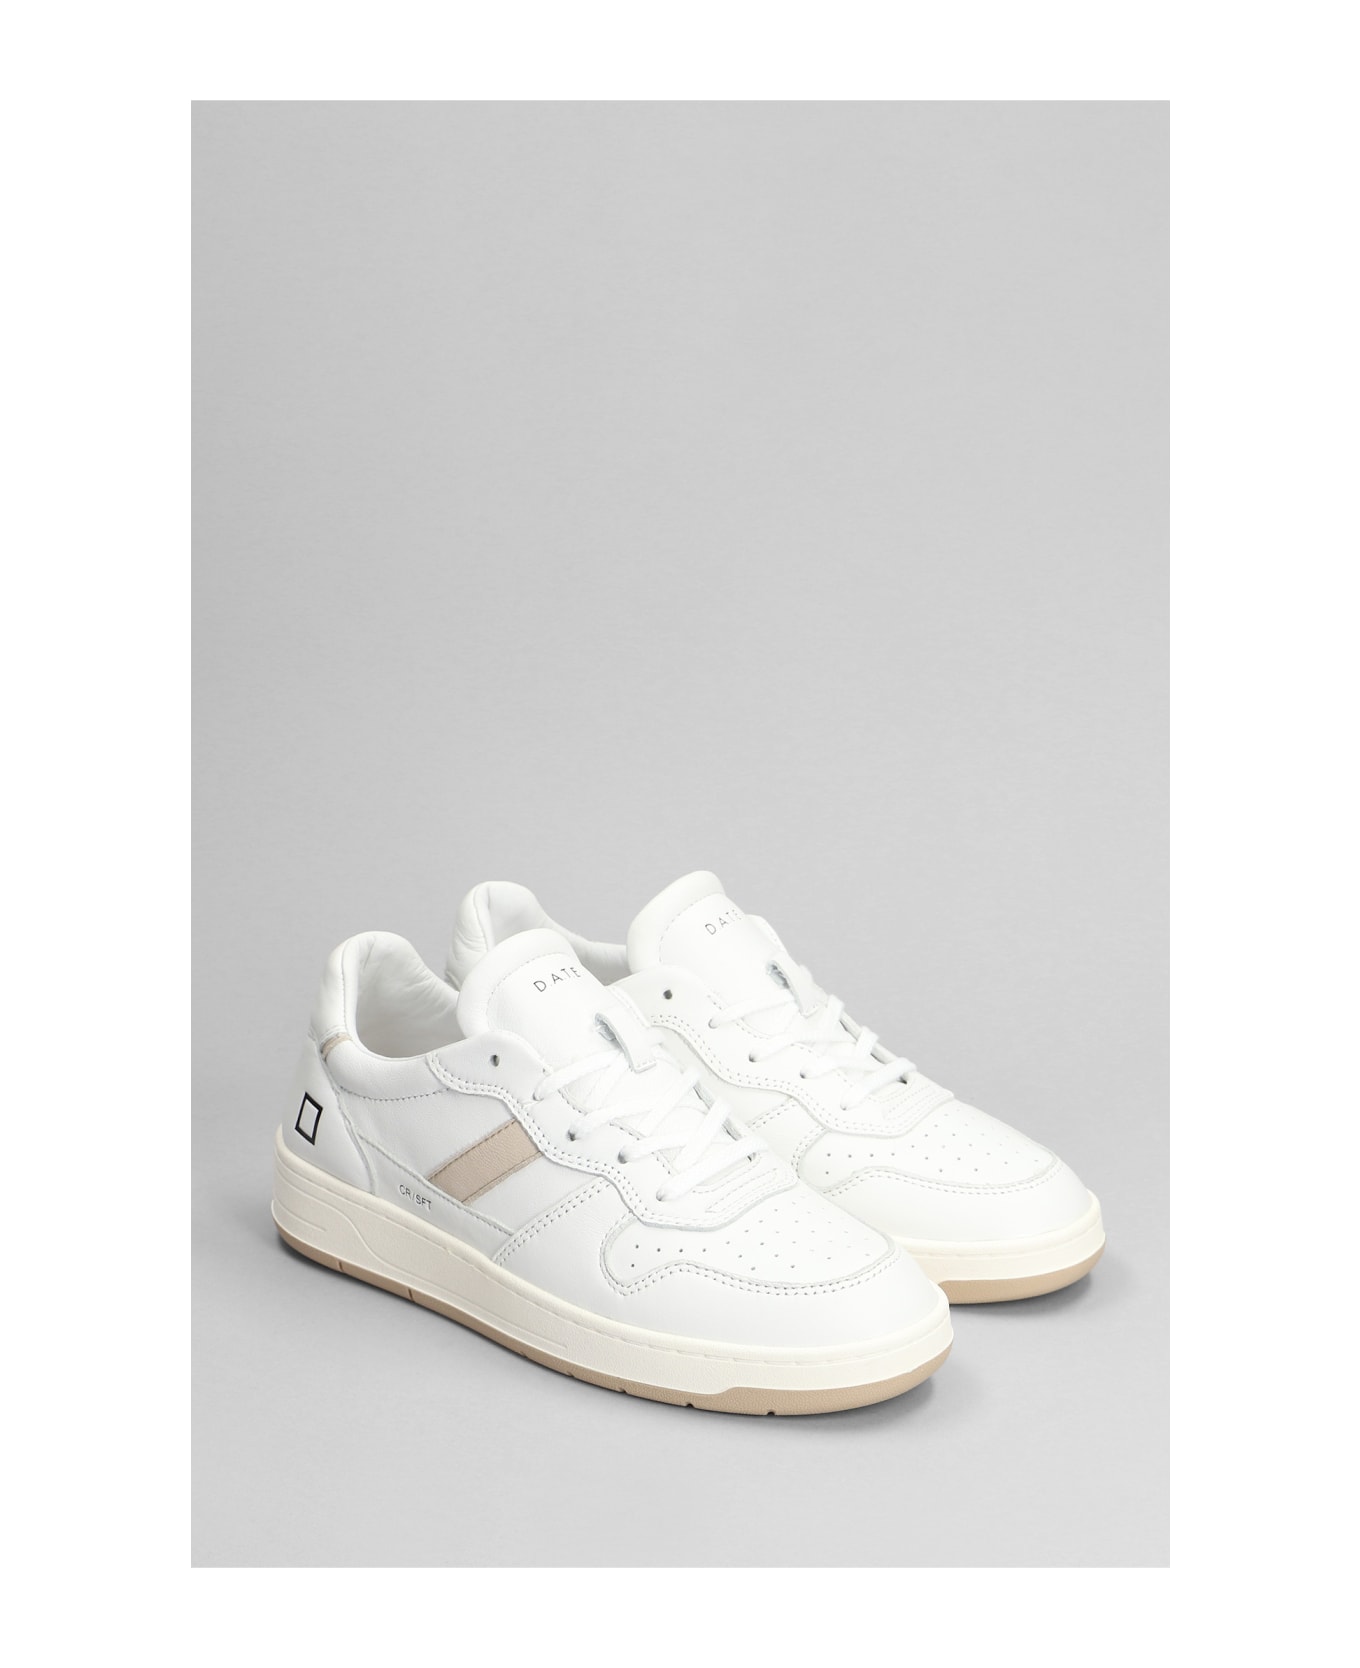 D.A.T.E. Court 2.0 Sneakers In White Leather D.A.T.E. スニーカー